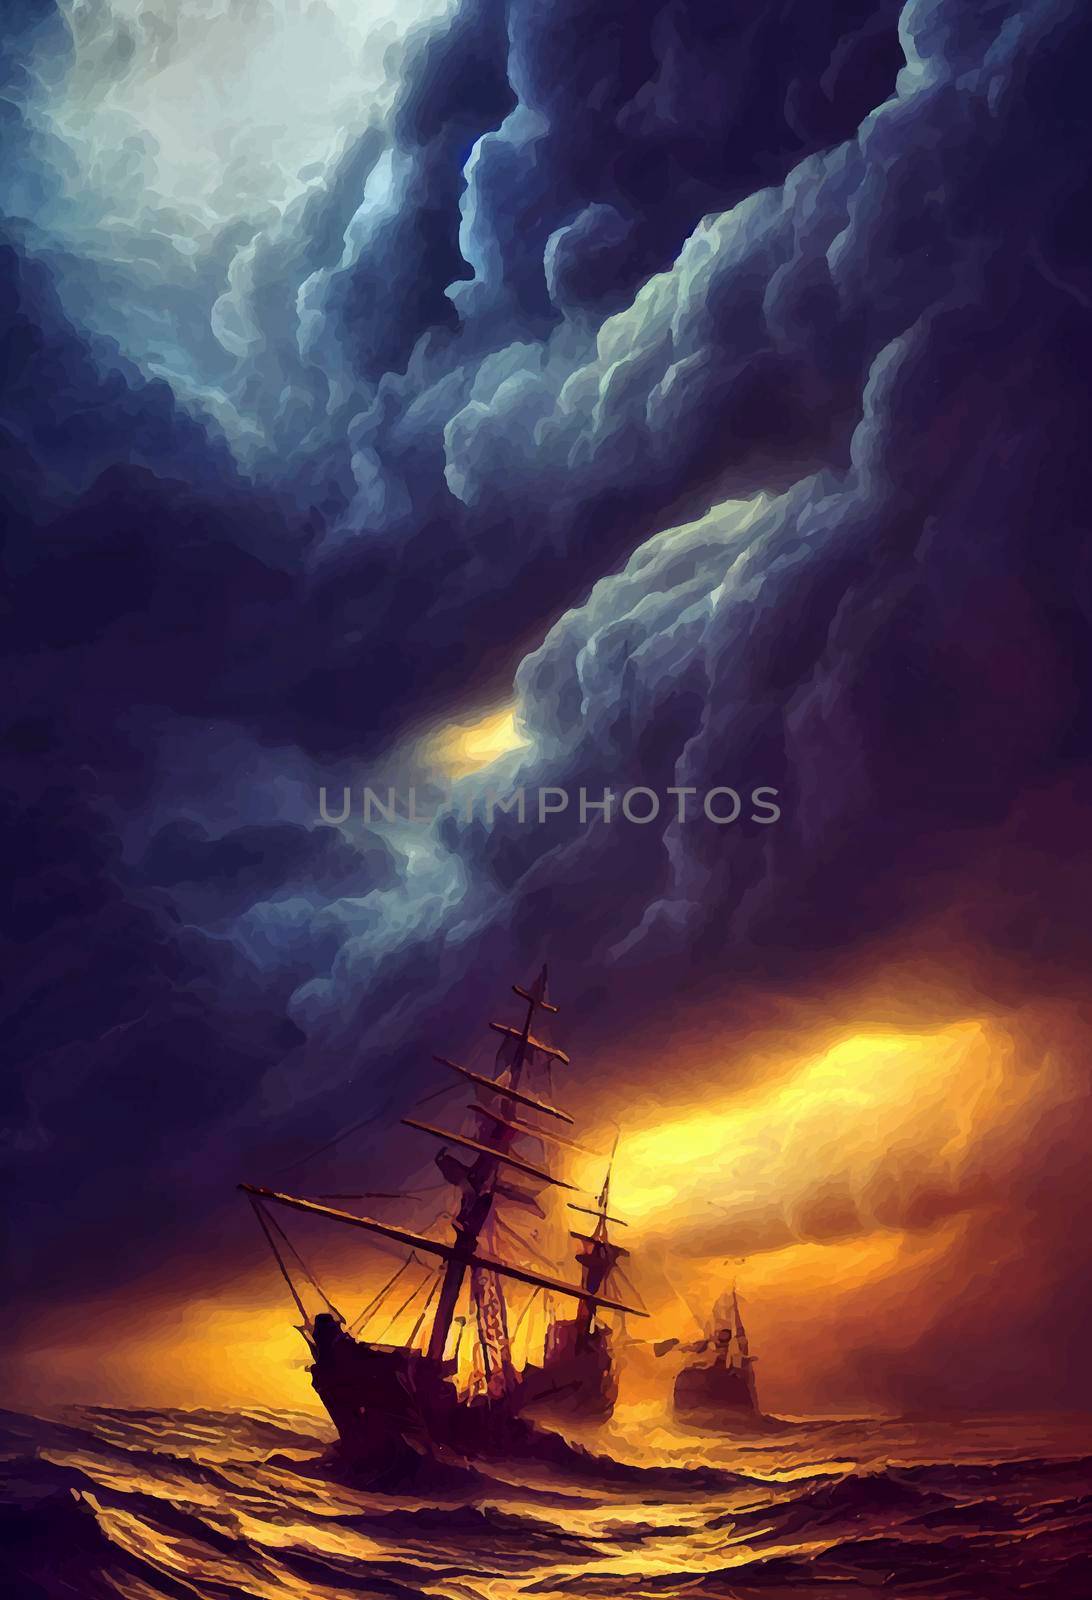 ship in the ocean in the middle of a storm.